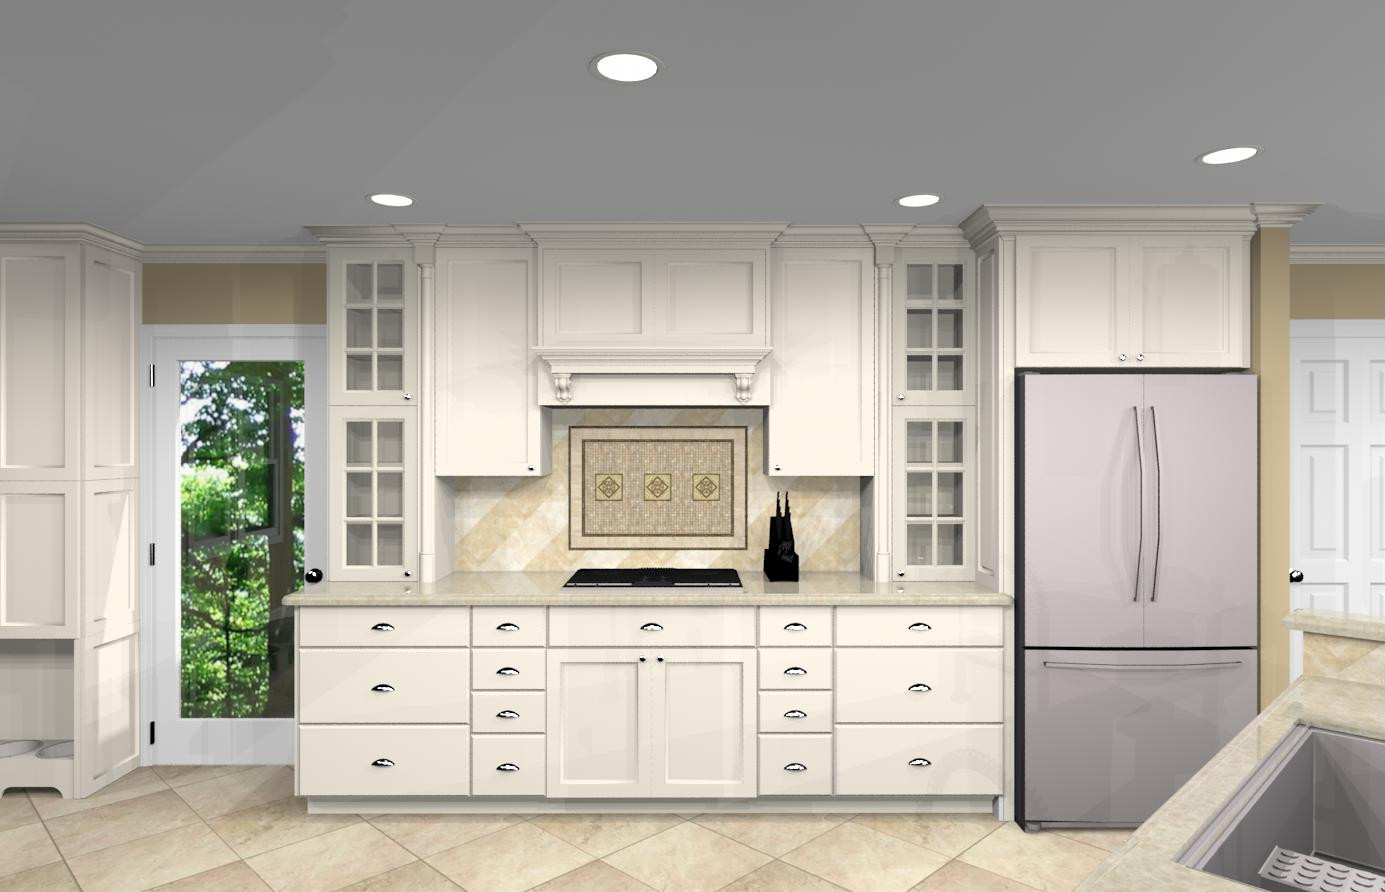 Kitchen Remodel Planner
 Kitchen Remodeling Design with Open Floor Plan in Watchung